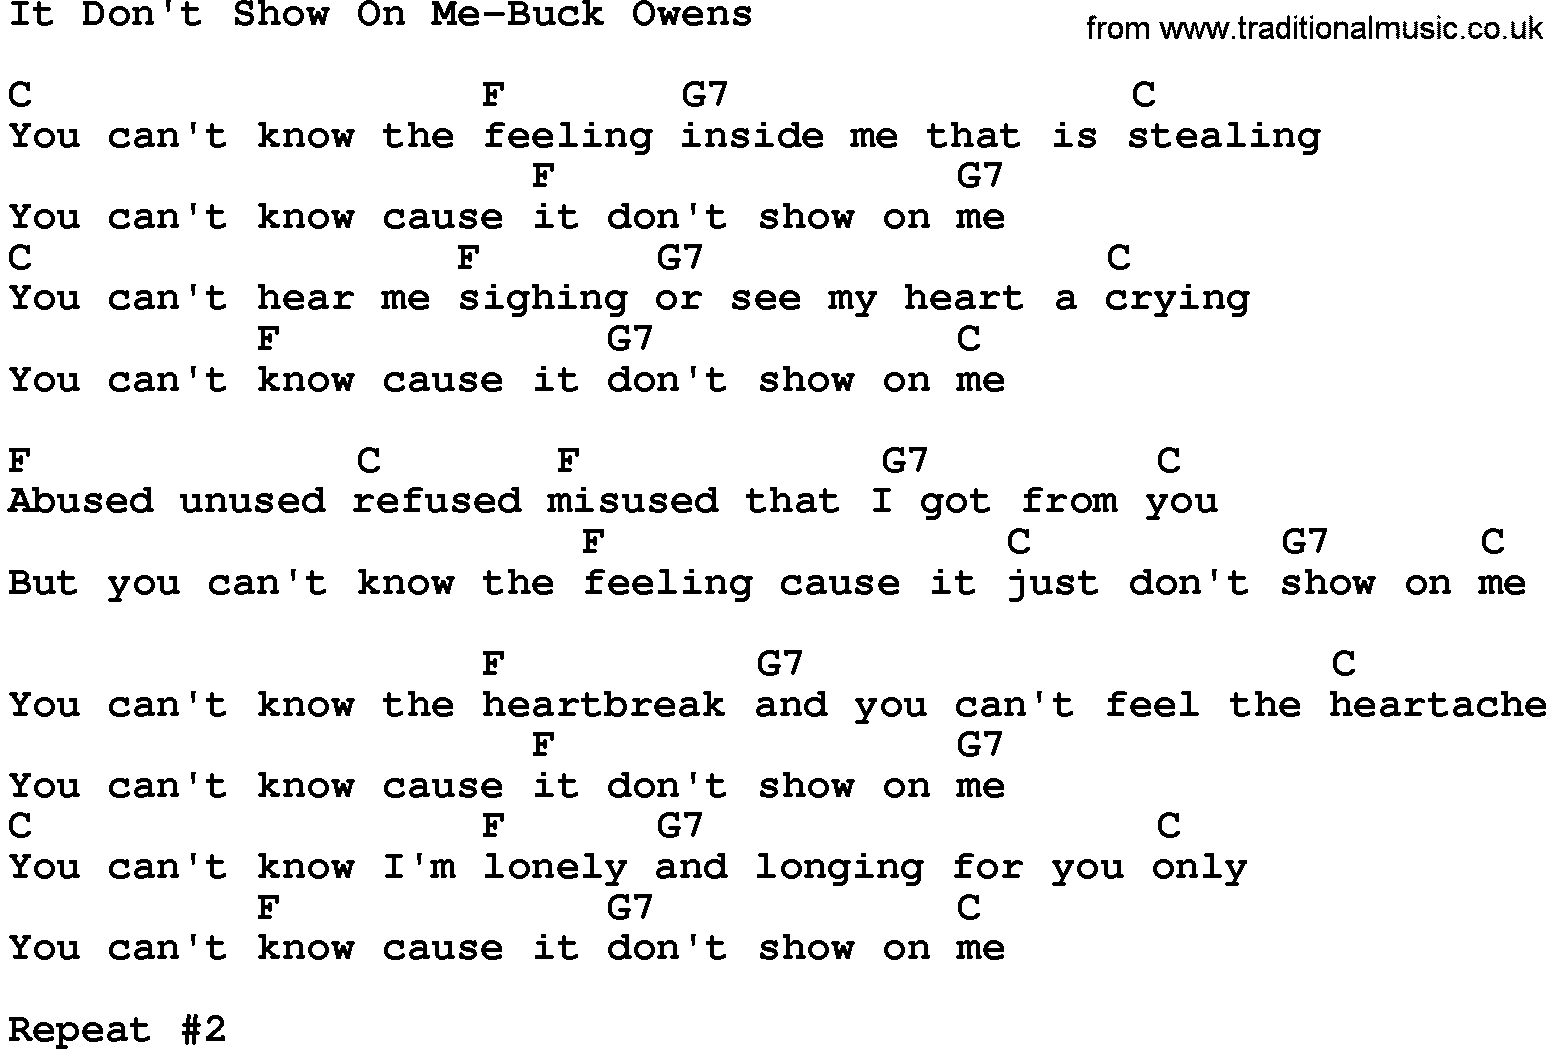 Country music song: It Don't Show On Me-Buck Owens lyrics and chords